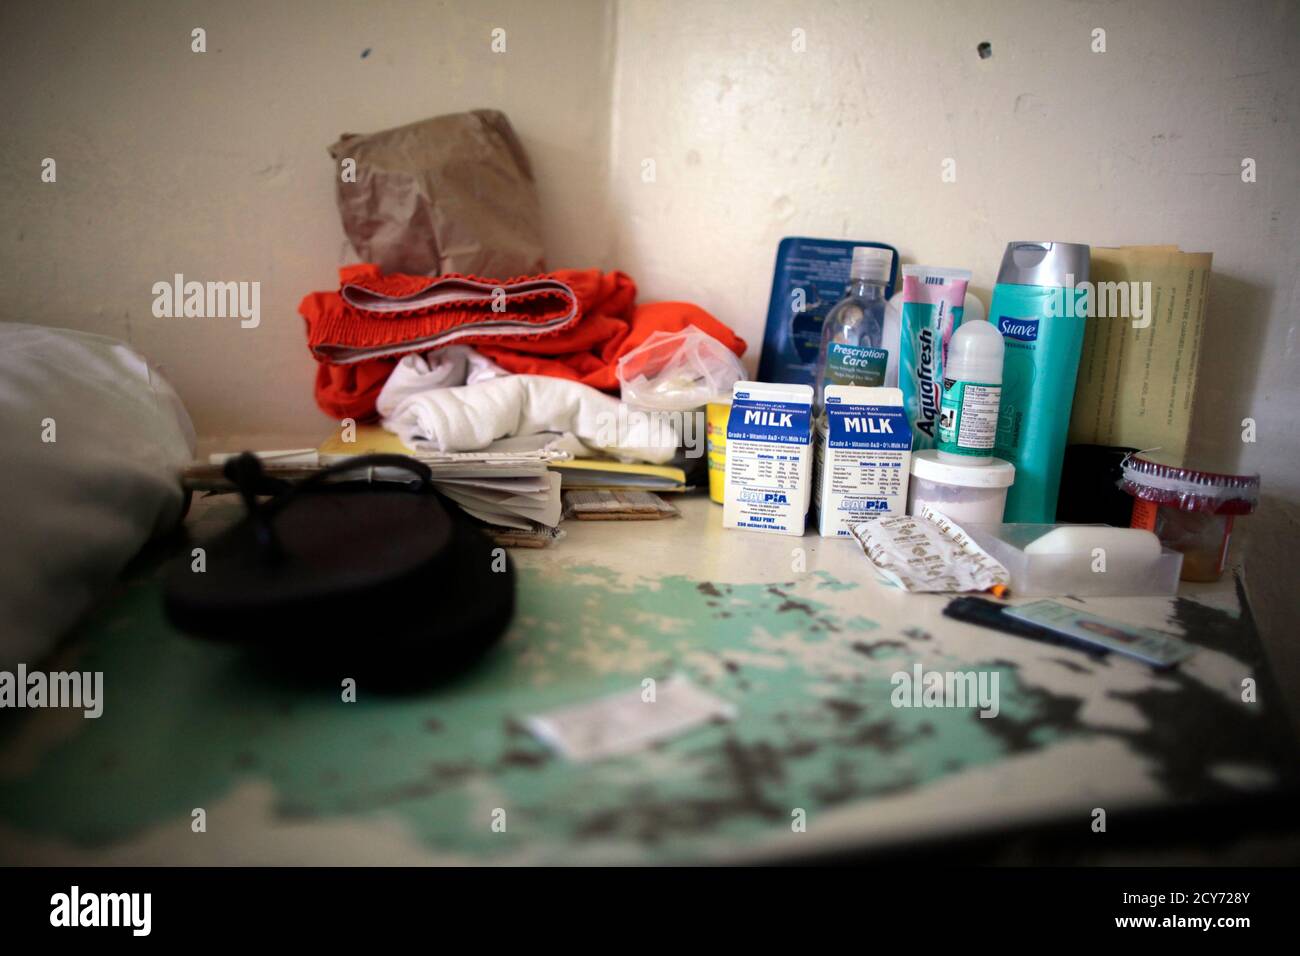 An inmate's possessions are seen in his cell at the California Institution for Men state prison in Chino, California, June 3, 2011.  The Supreme Court has ordered California to release more than 30,000 inmates over the next two years or take other steps to ease overcrowding in its prisons to prevent "needless suffering and death." California's 33 adult prisons were designed to hold about 80,000 inmates and now have about 145,000. The United States has more than 2 million people in state and local prisons. It has long had the highest incarceration rate in the world. REUTERS/Lucy Nicholson (UNIT Stock Photo